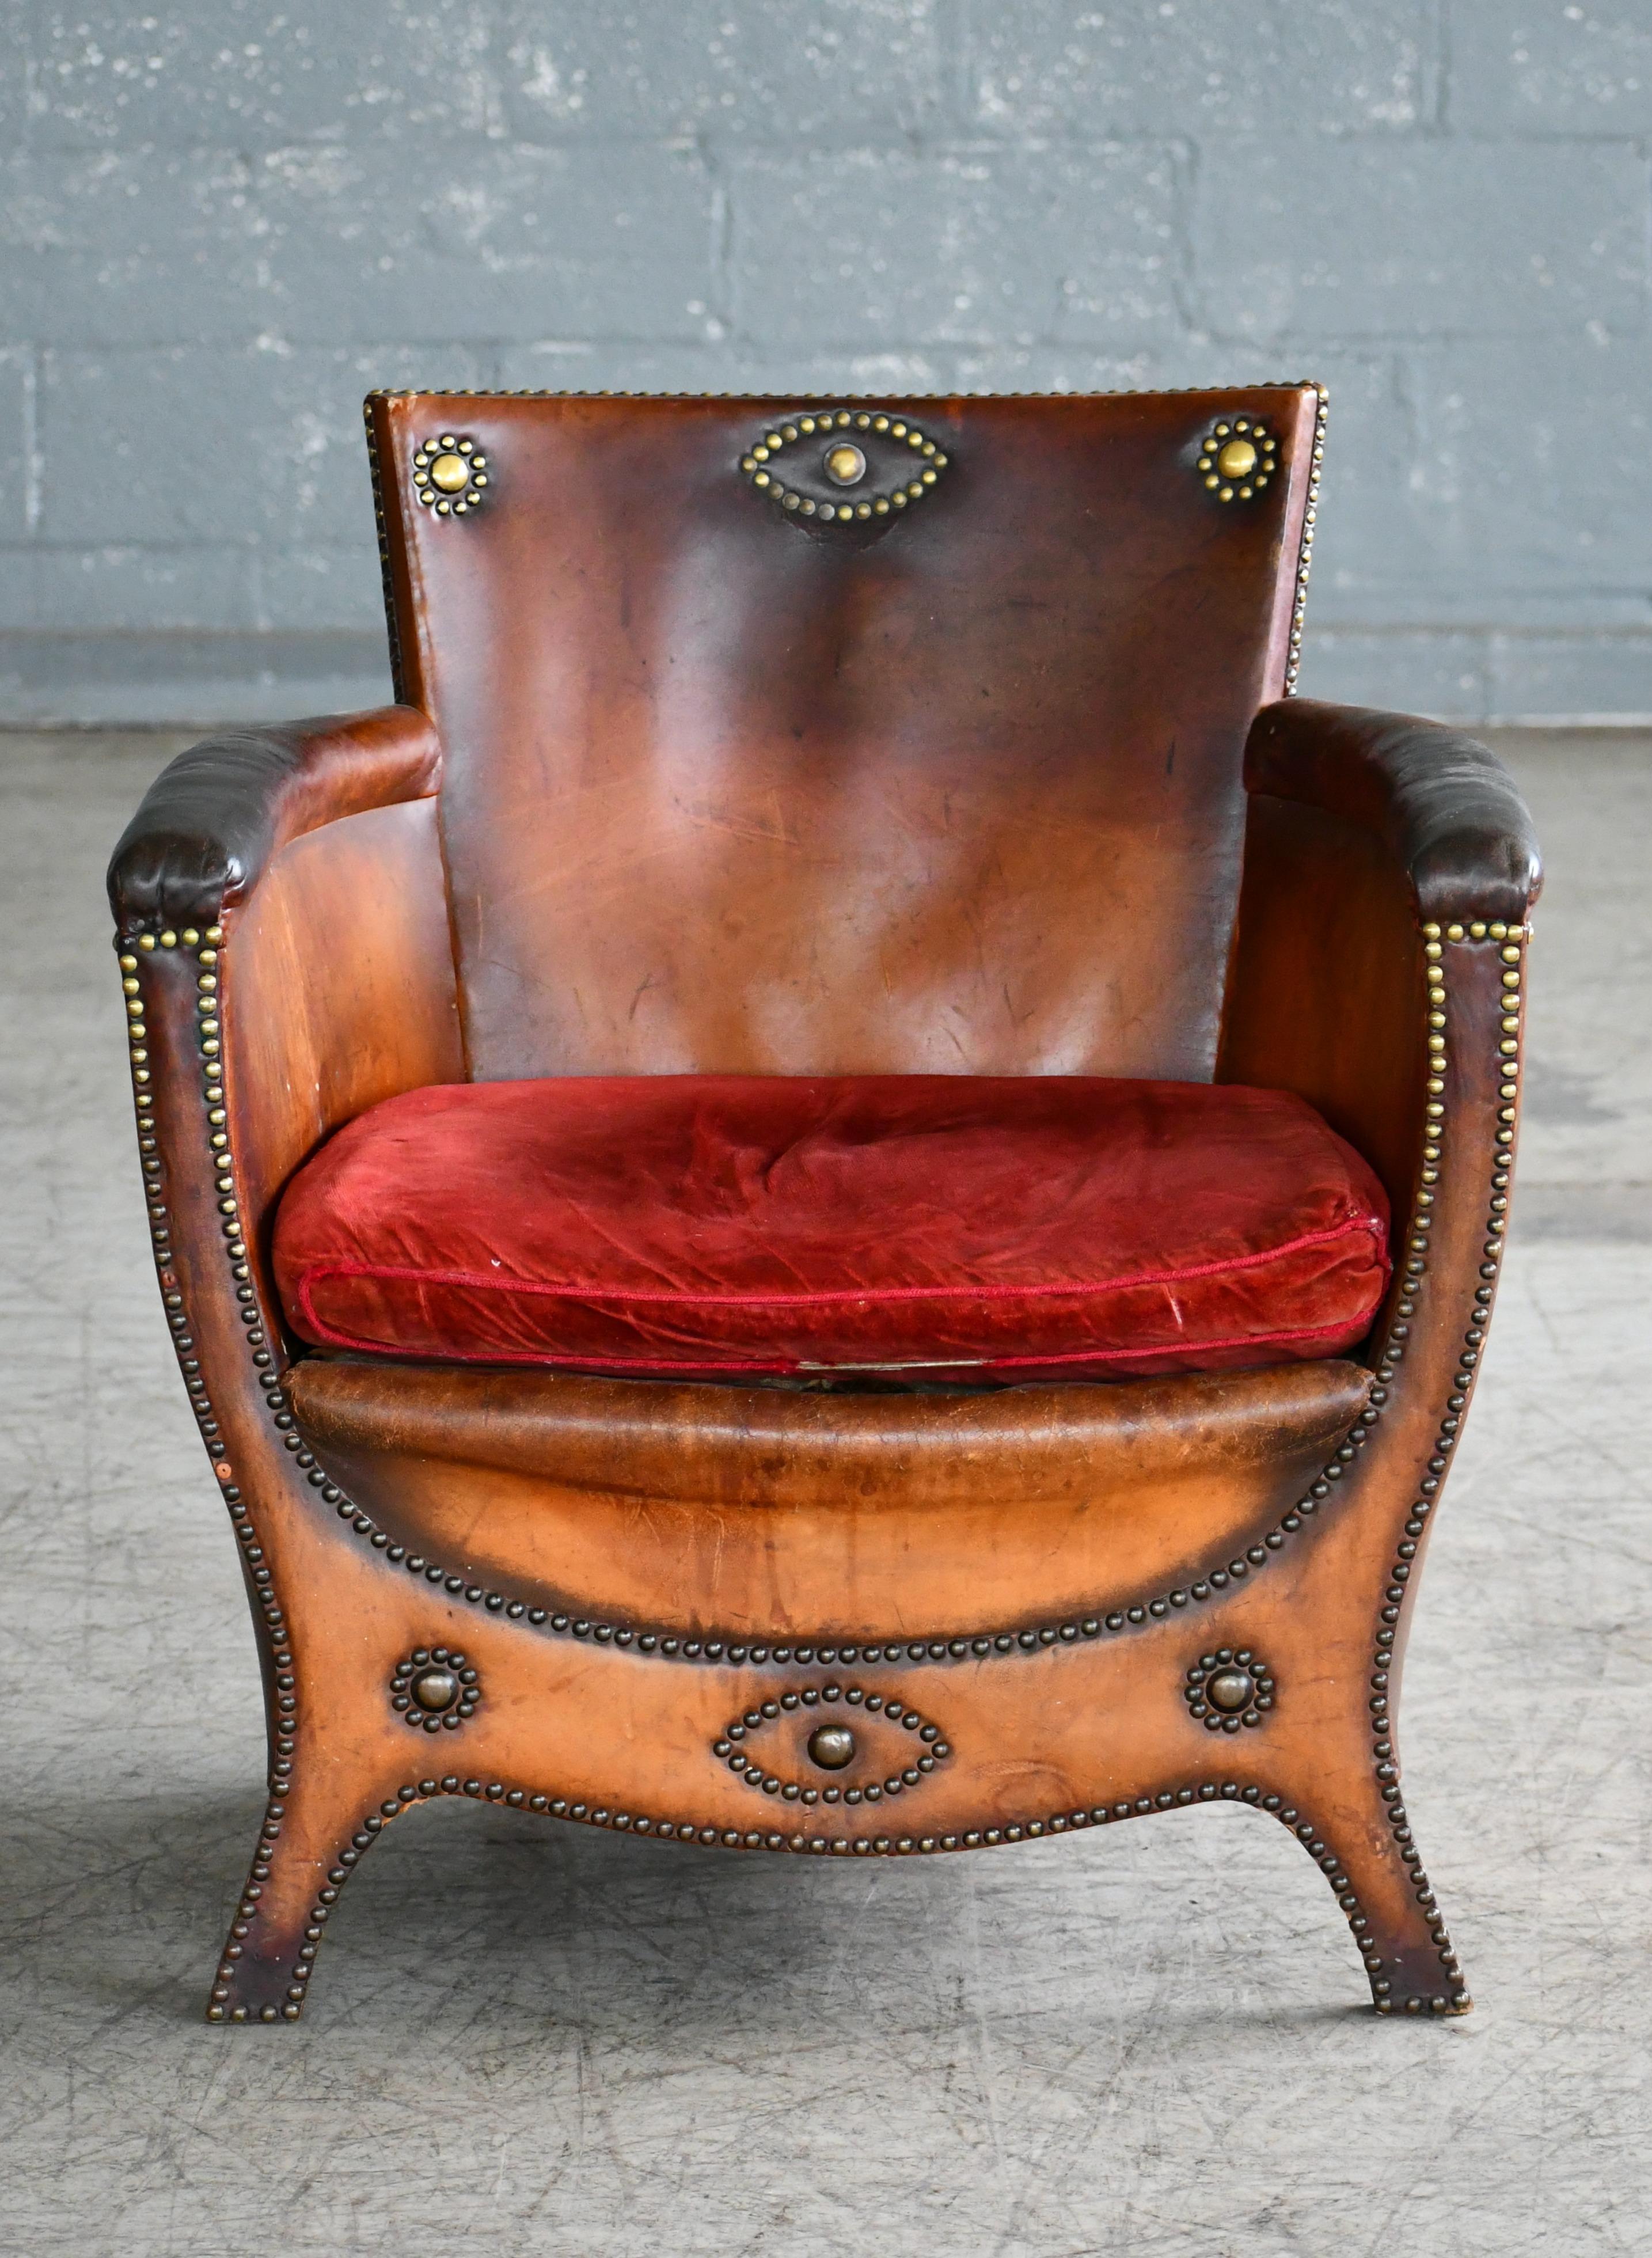 Superb 1930s-1940s baroque-style lounge chair attributed to Otto Schulz designed for Boet - Schulz' own high-end retail store in Gothenburg, Sweden. The chair in leather and birch wood is very representative of his innovative low swung baroque